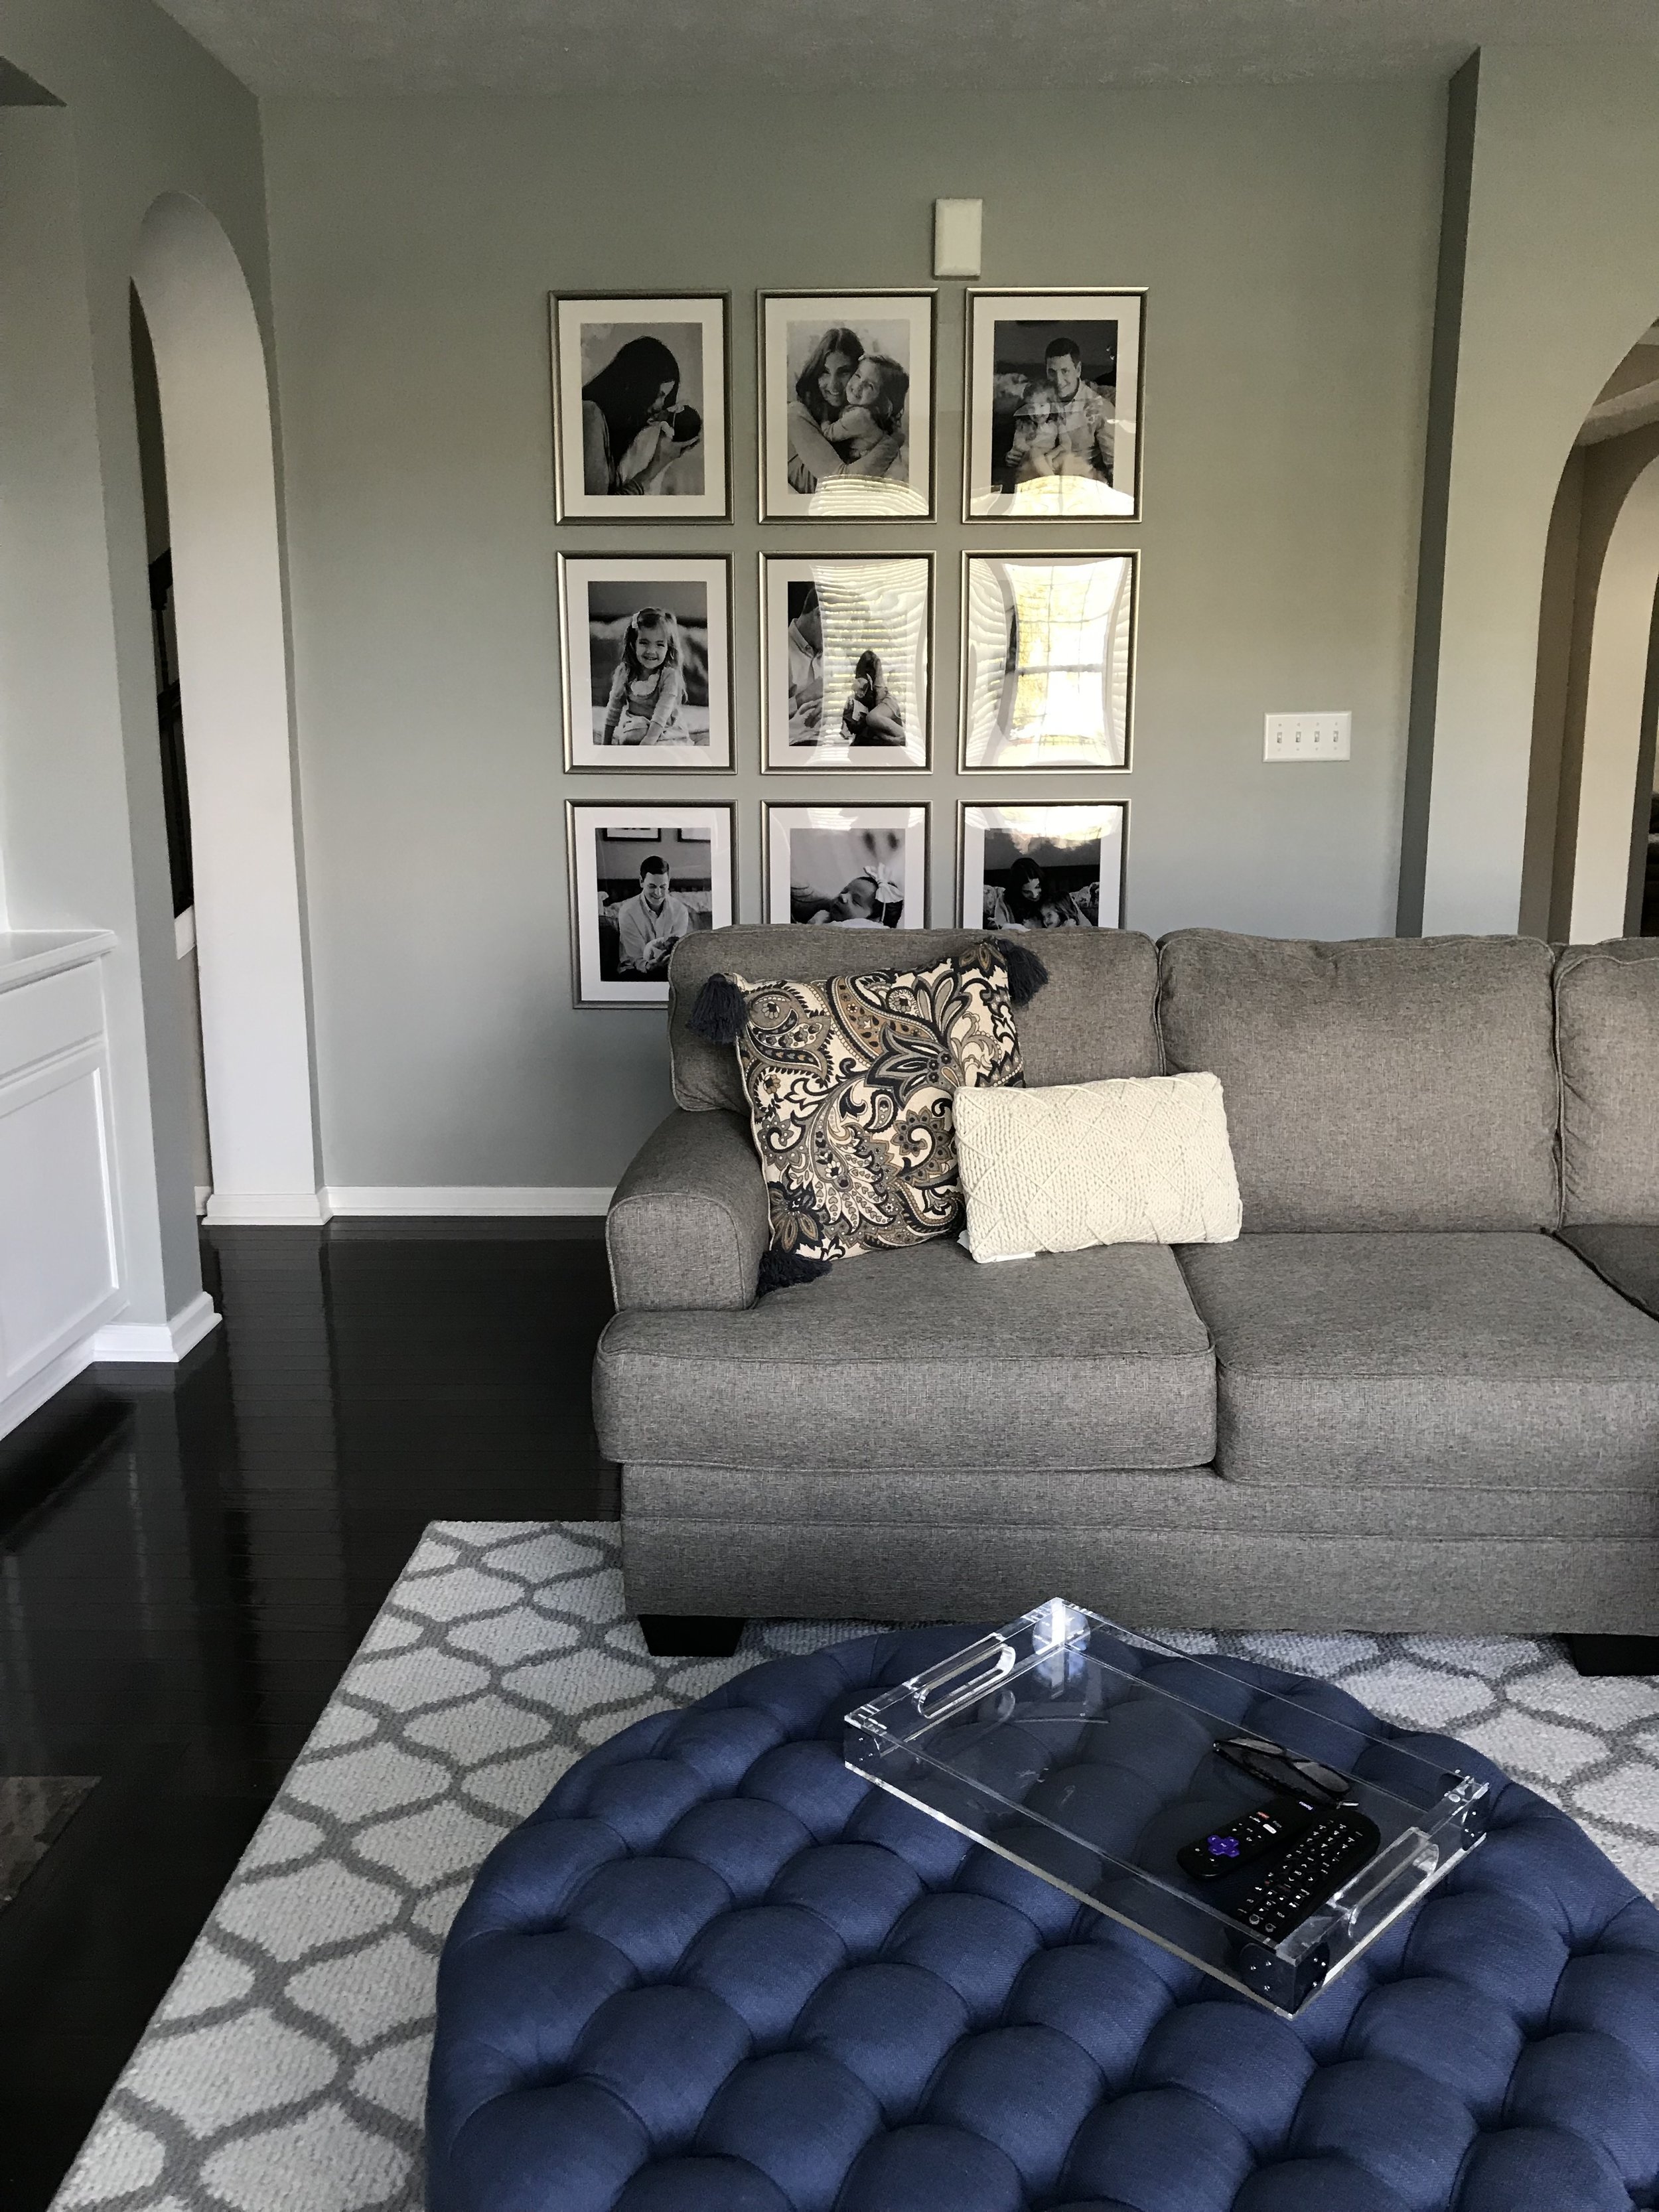 Gallery Wall - Ikea Frames and Costco Prints